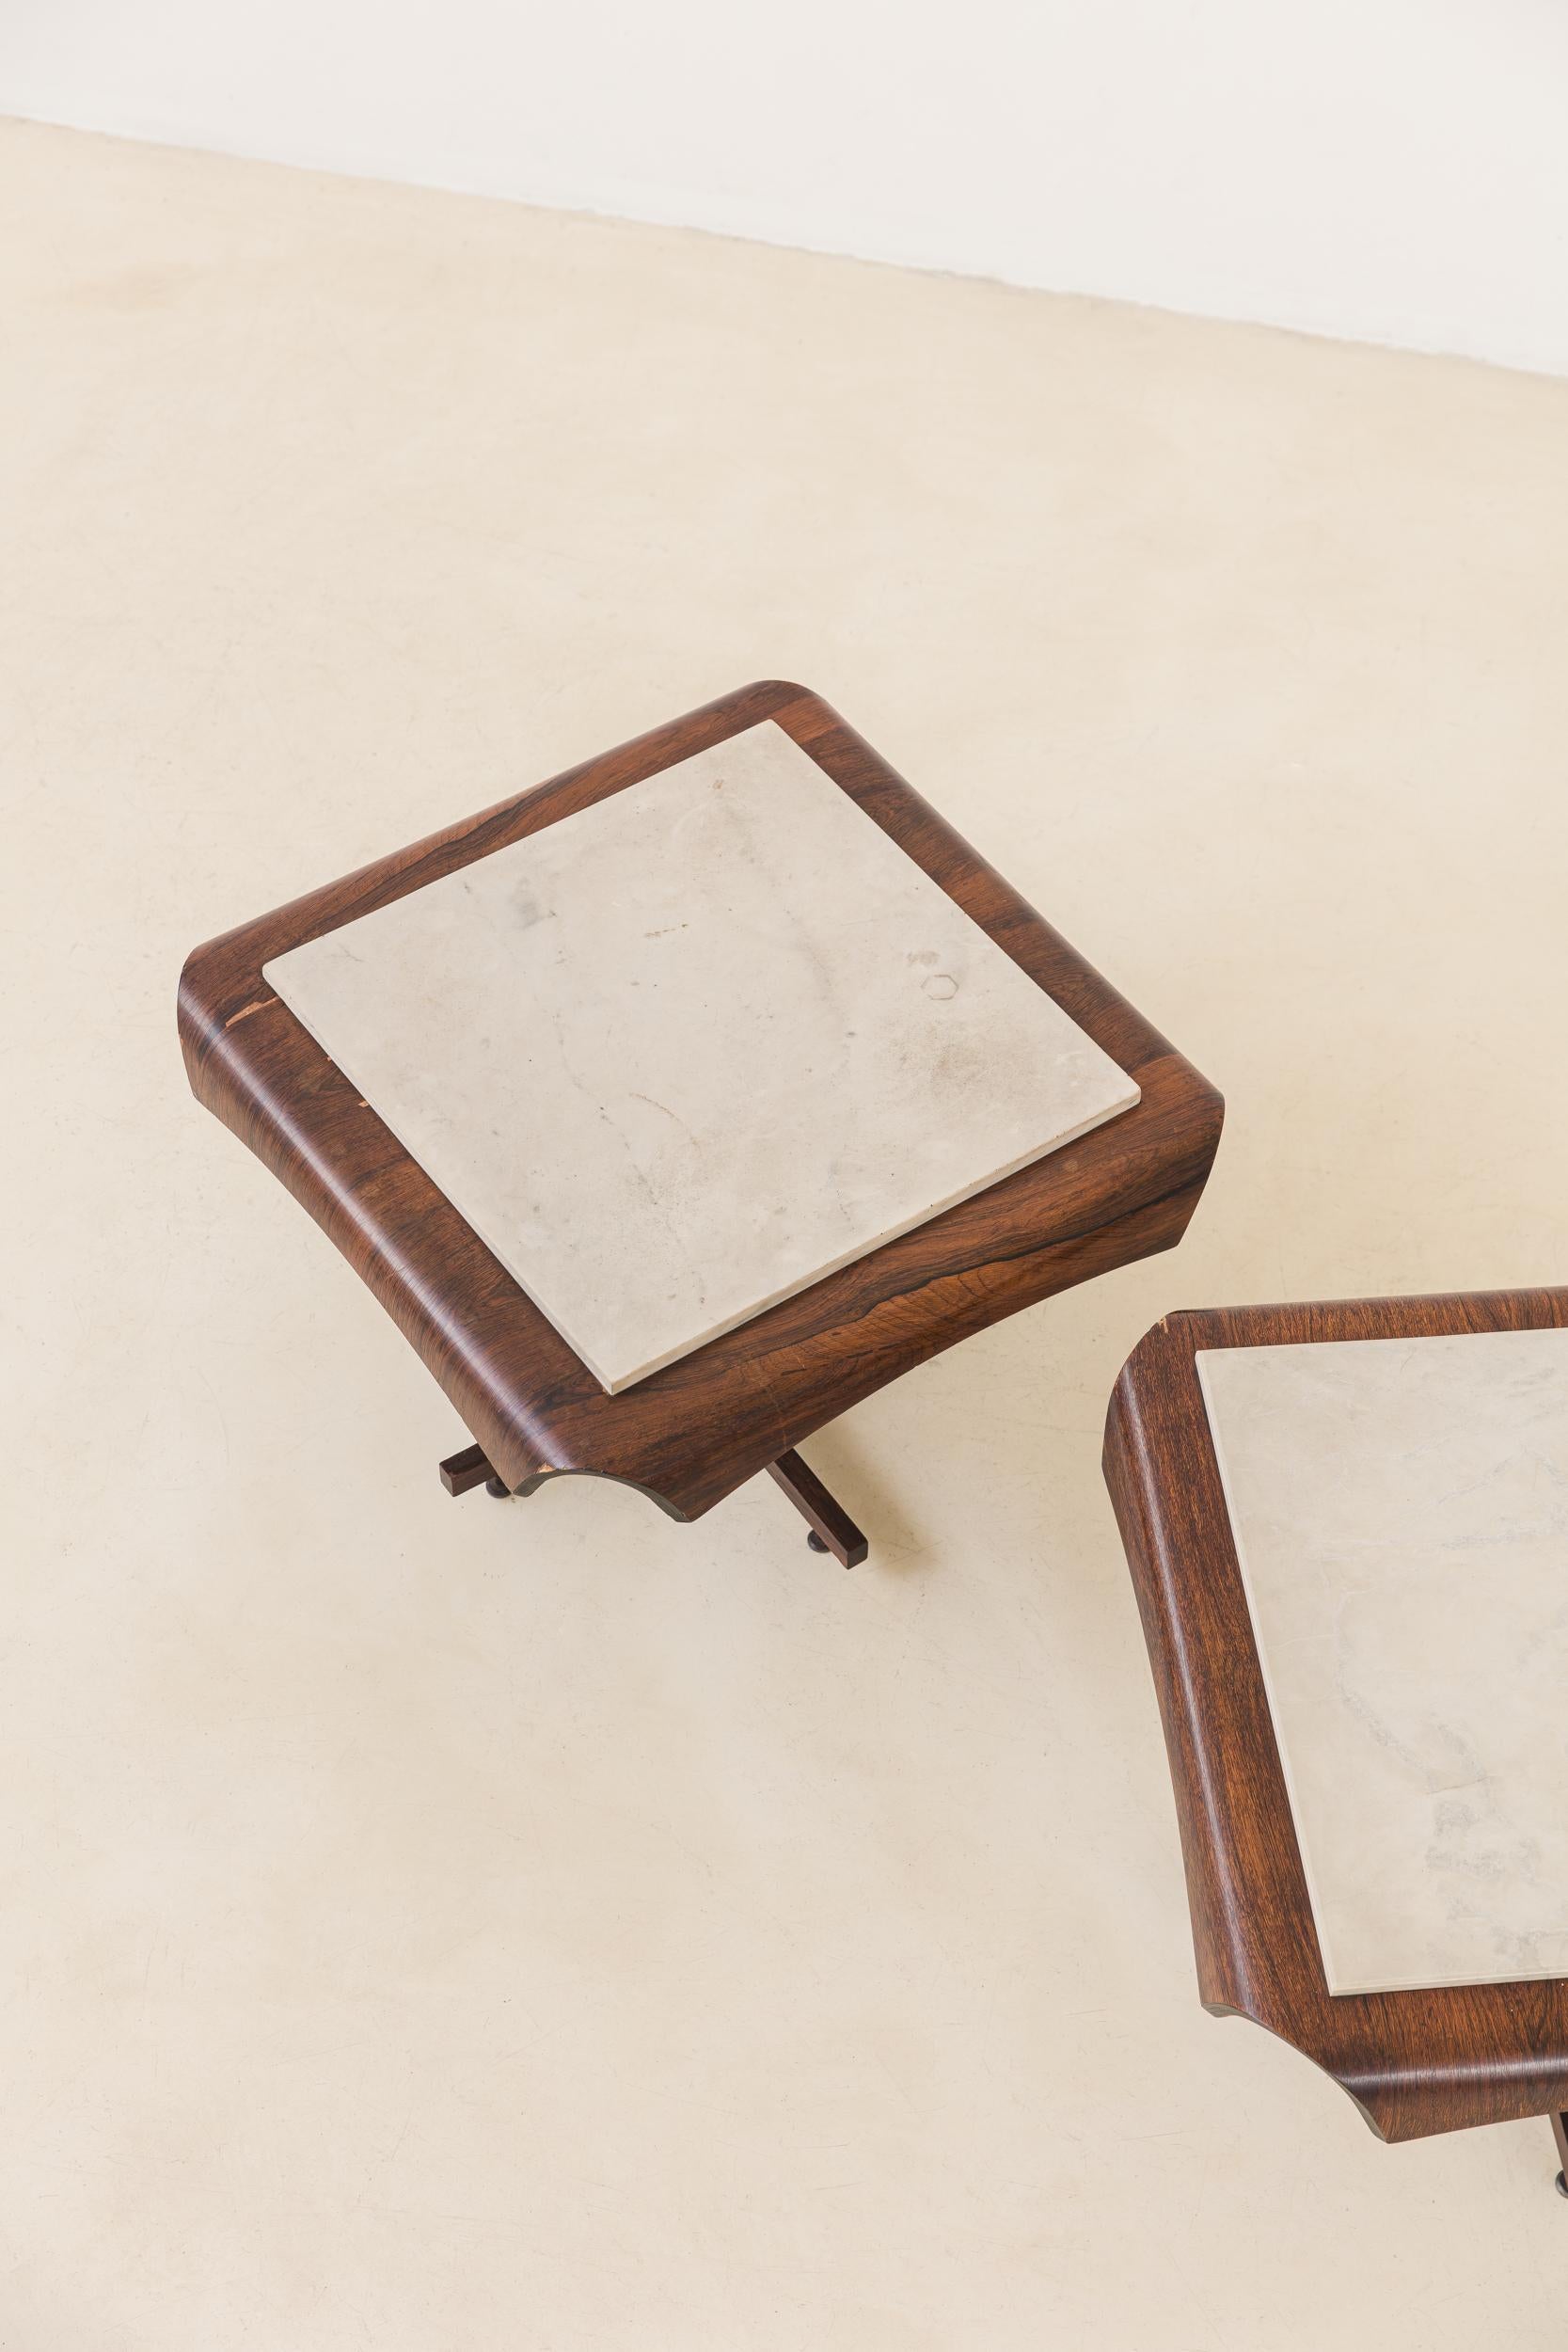 Marble Side Tables by Jorge Zalszupin, Molded Rosewood and Mable, Brazil, 1964 For Sale